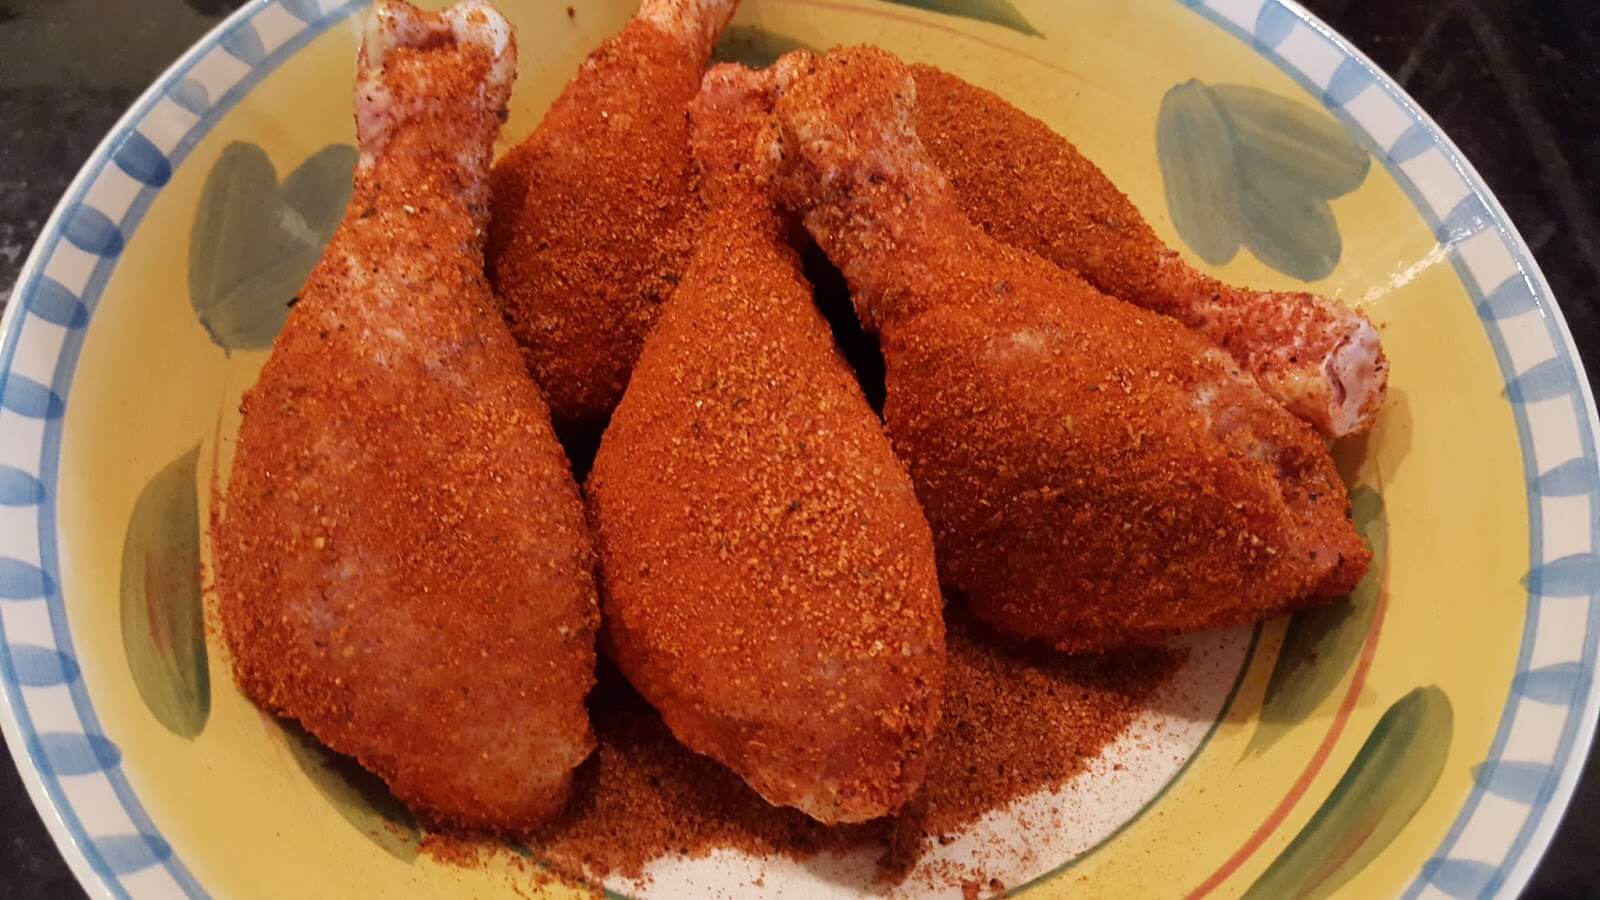 seasoned chicken legs ready for smoking on the grill